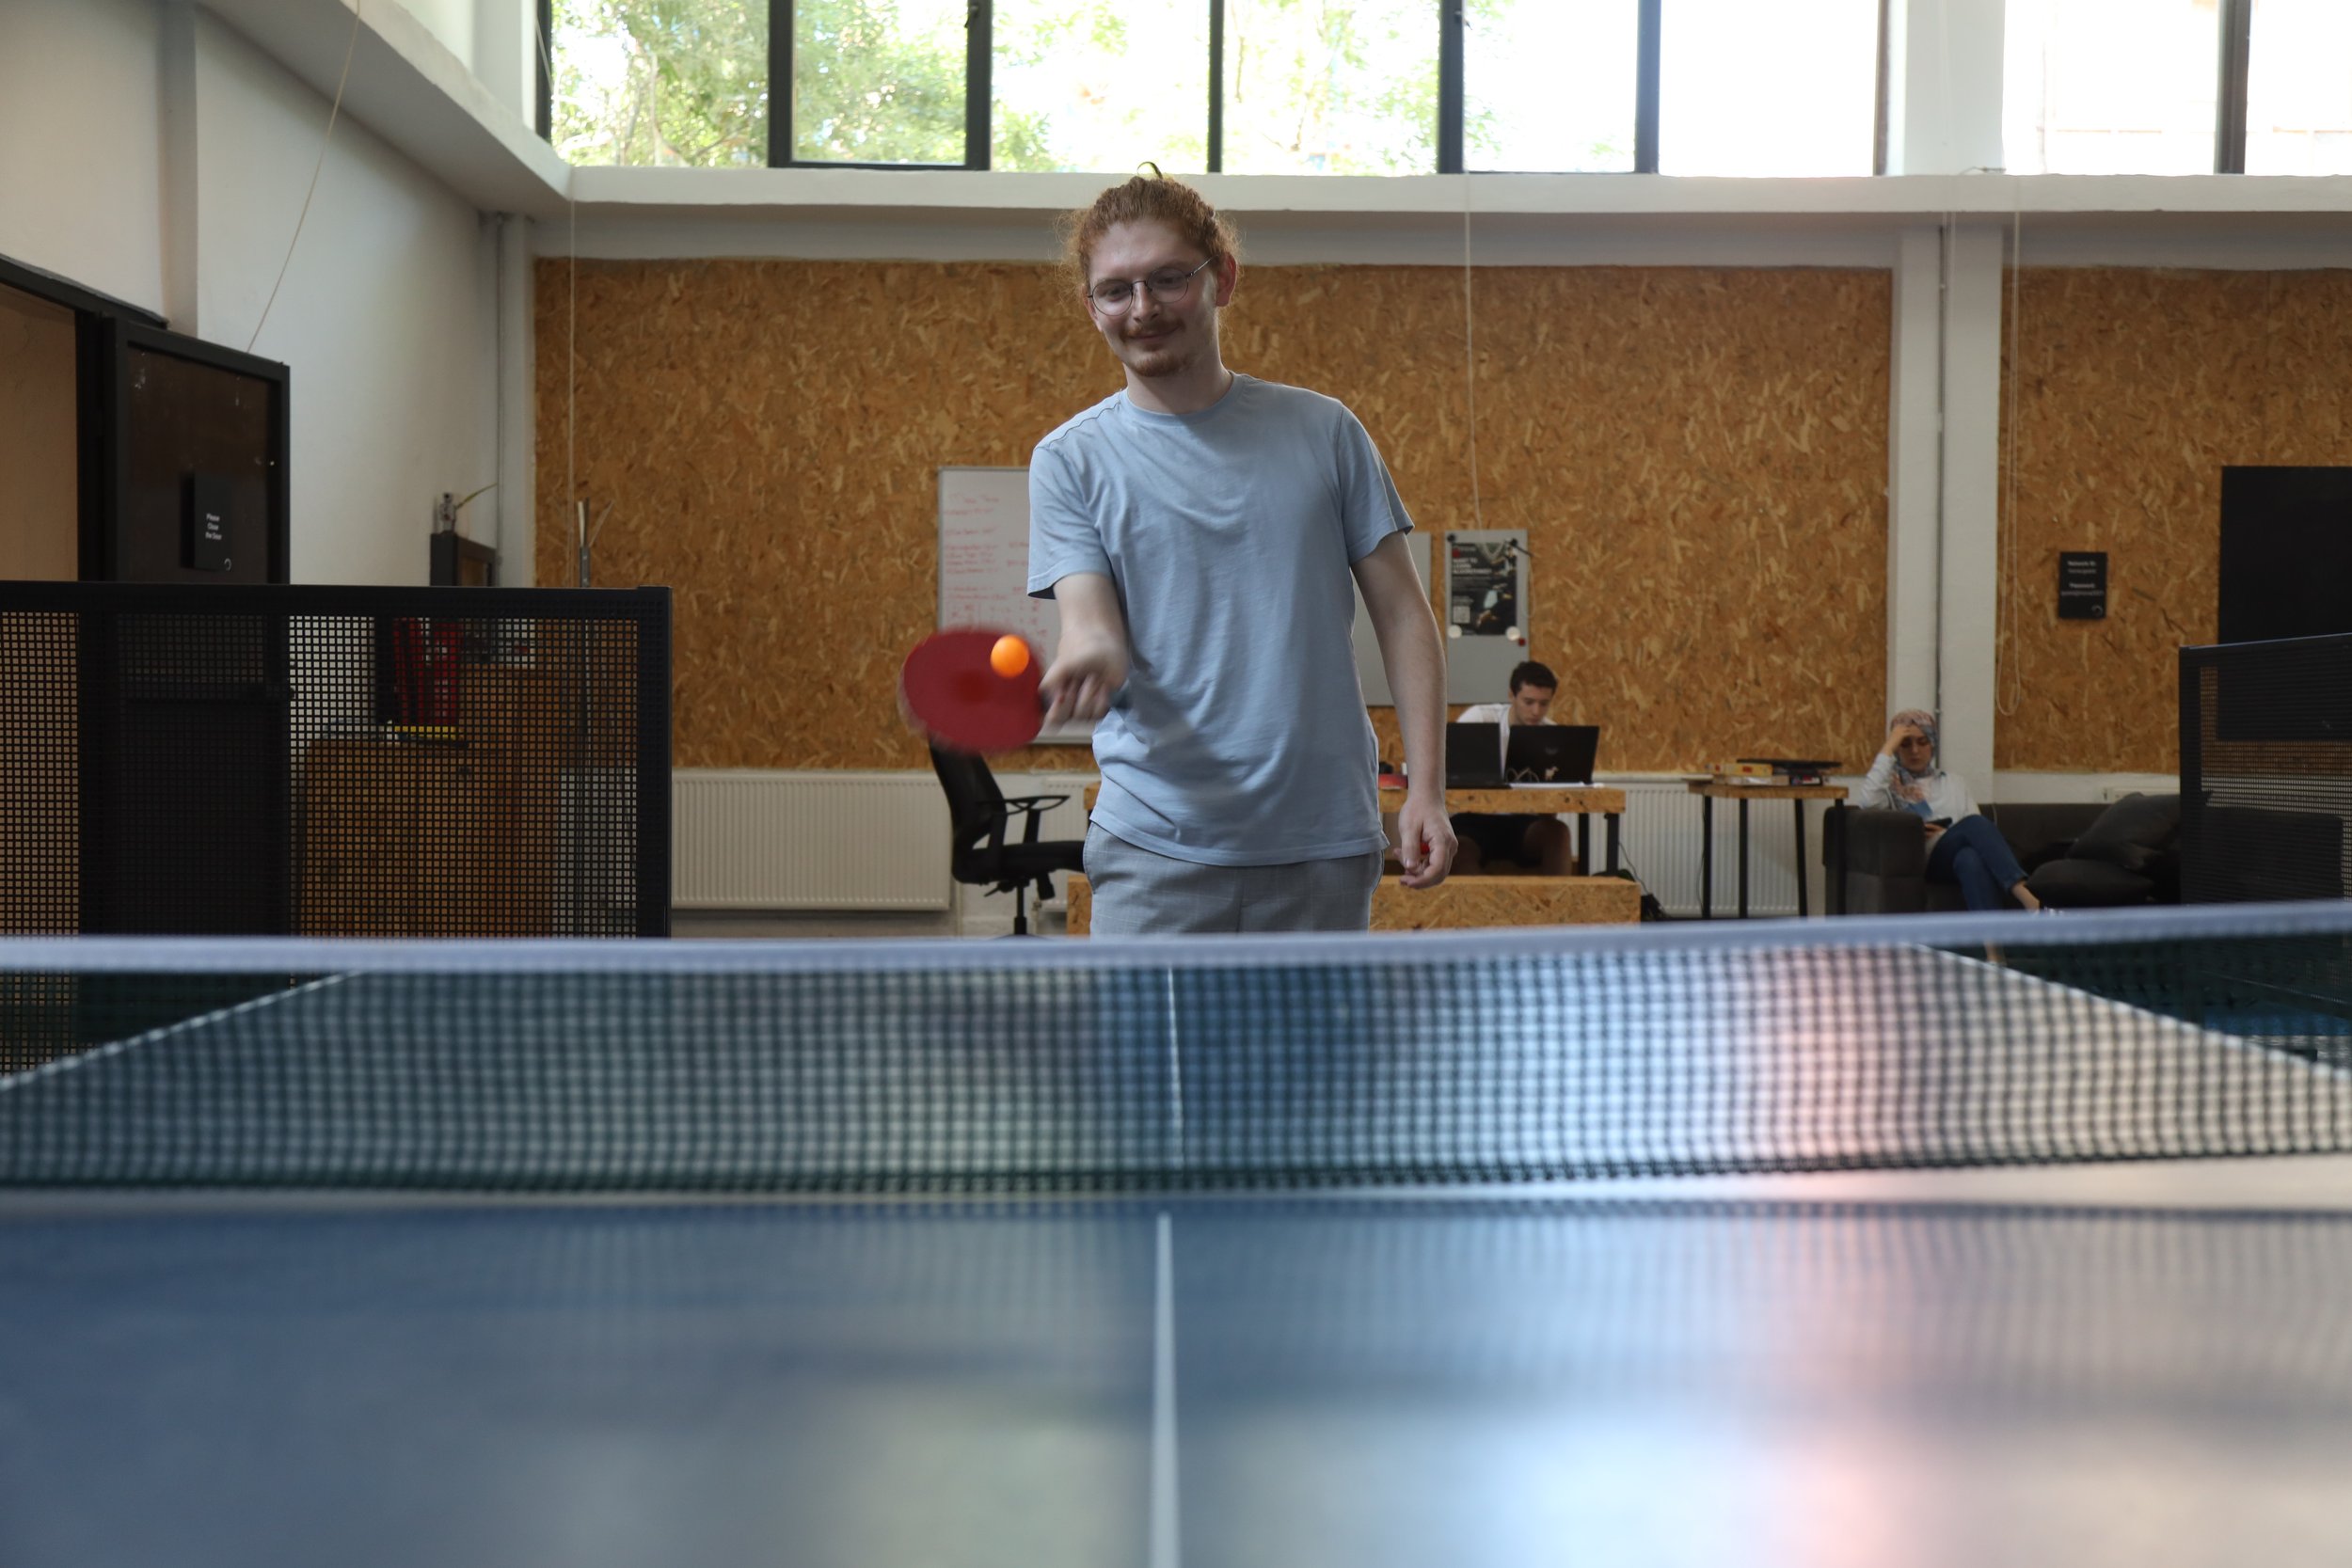 The Table Tennis Tournament